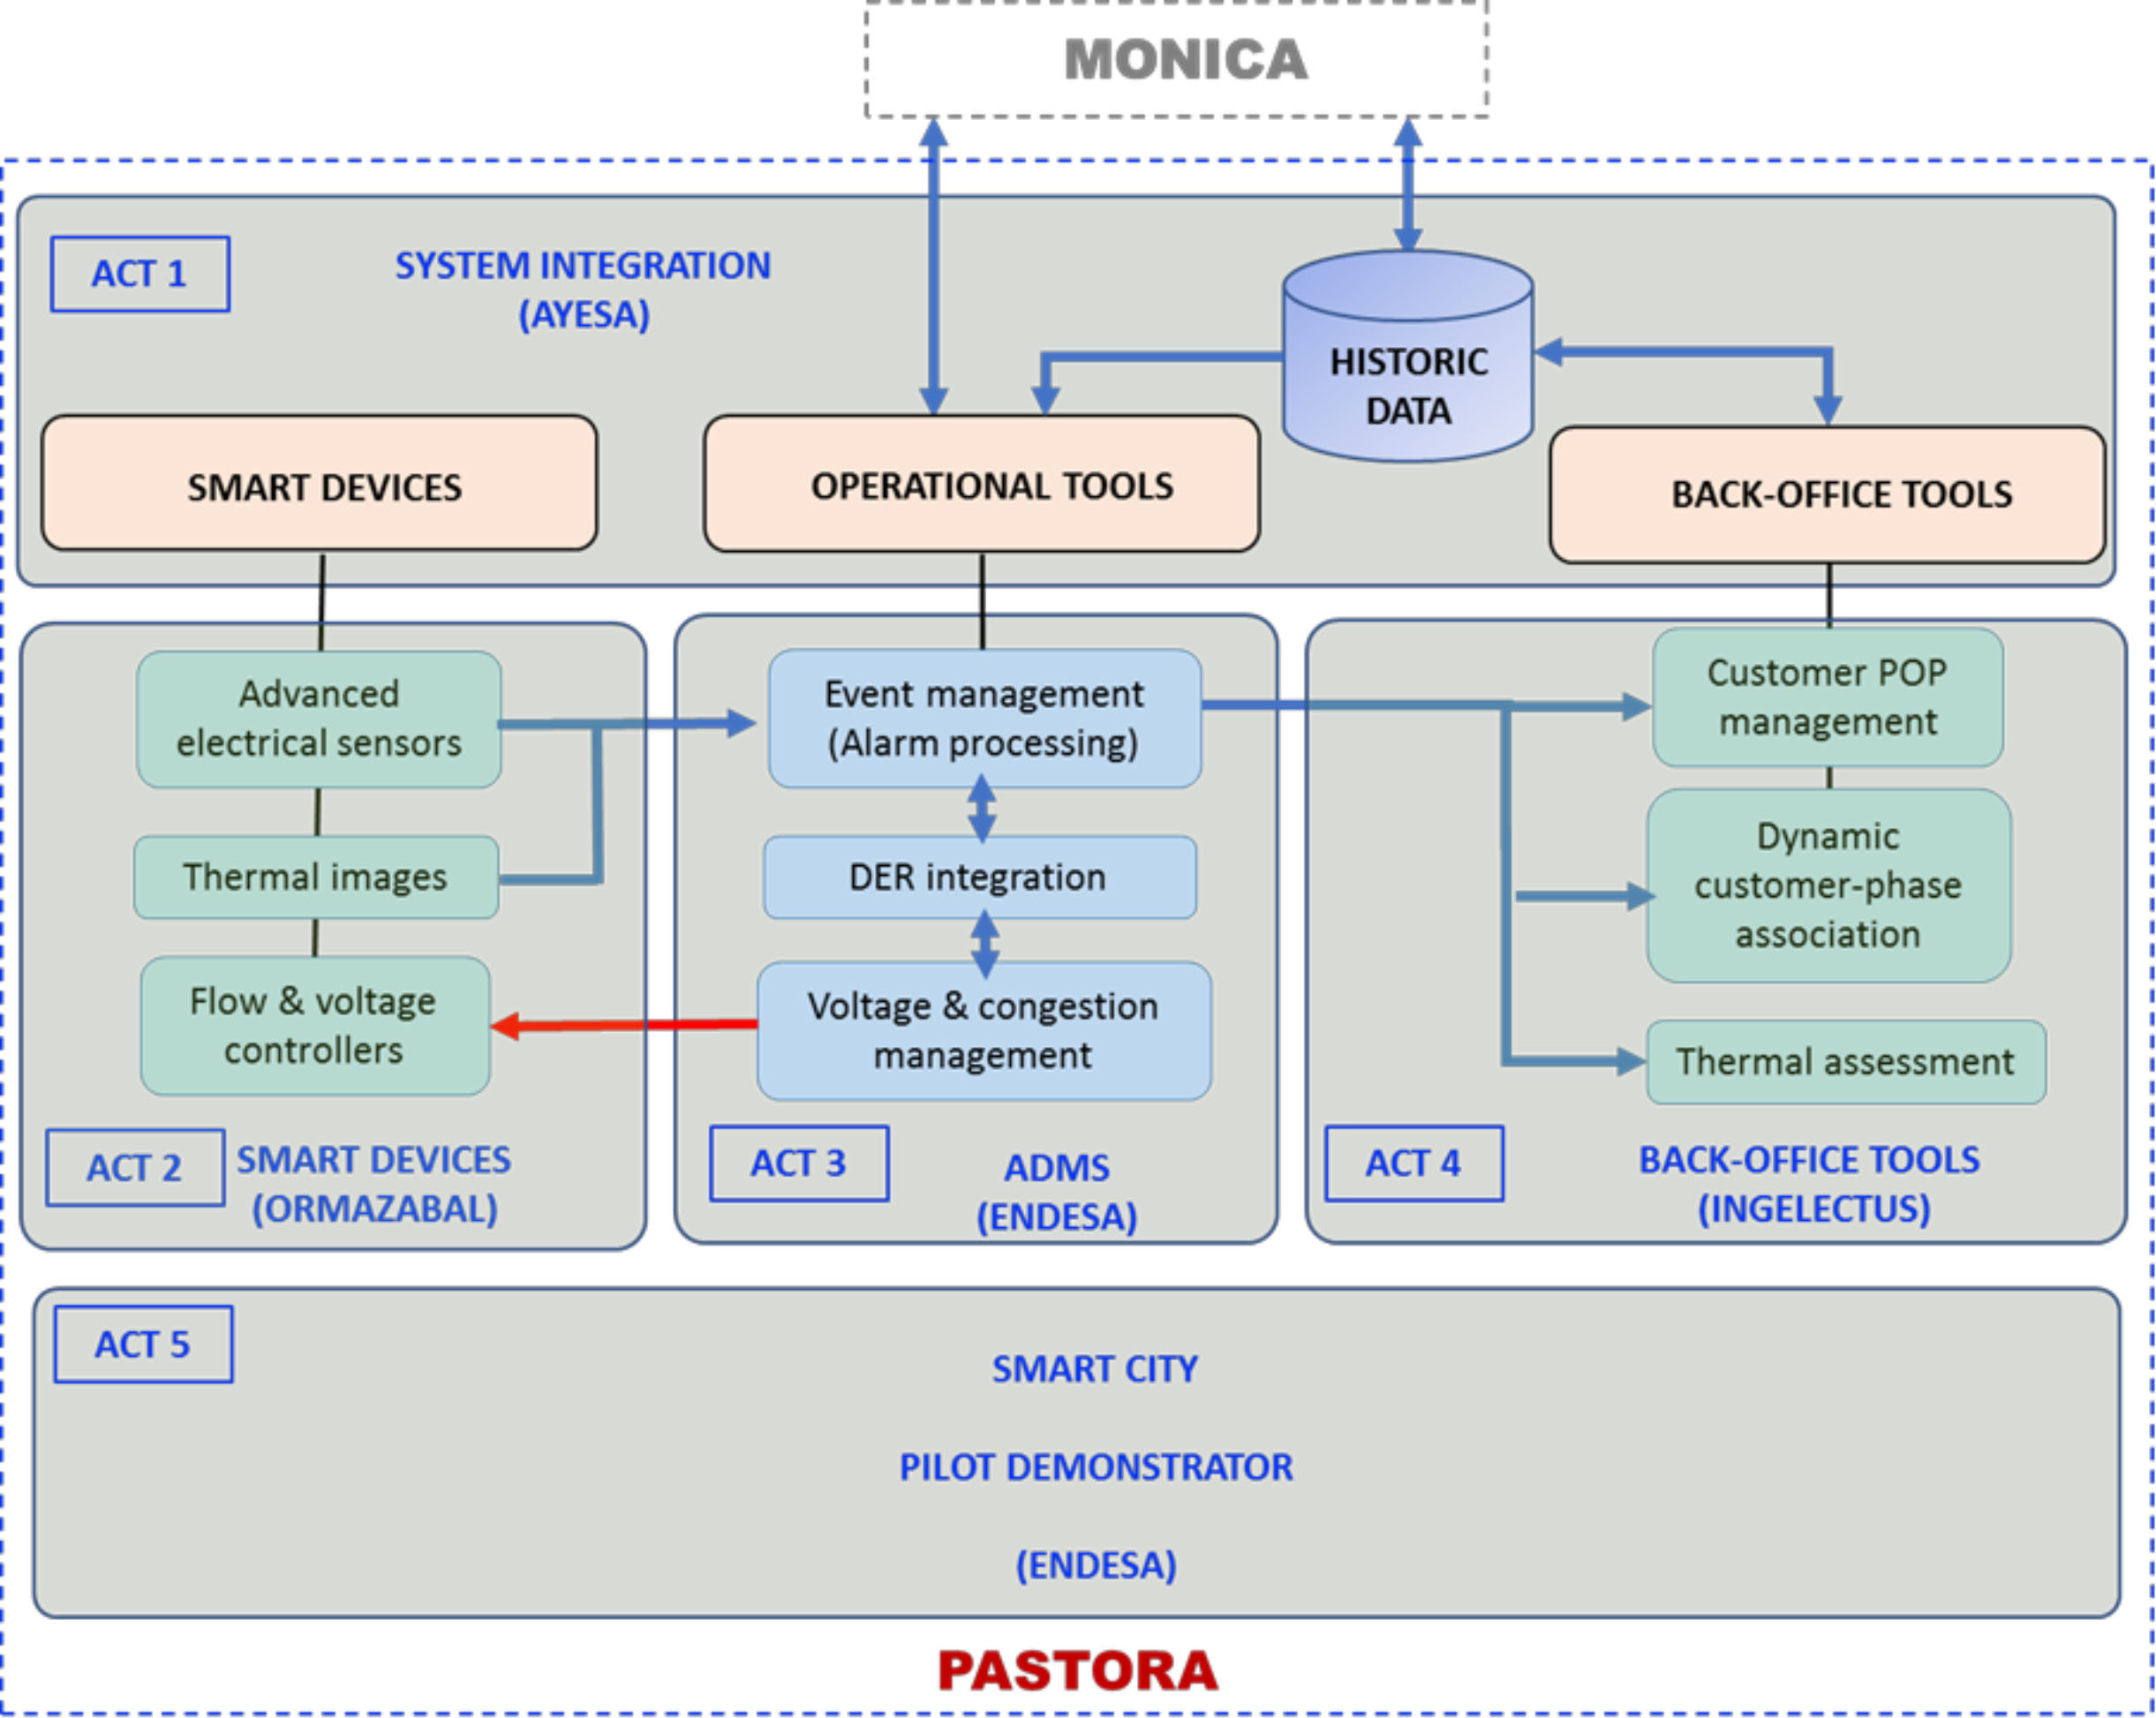 PASTORA functional blocks and their relationship with the MONICA platform.